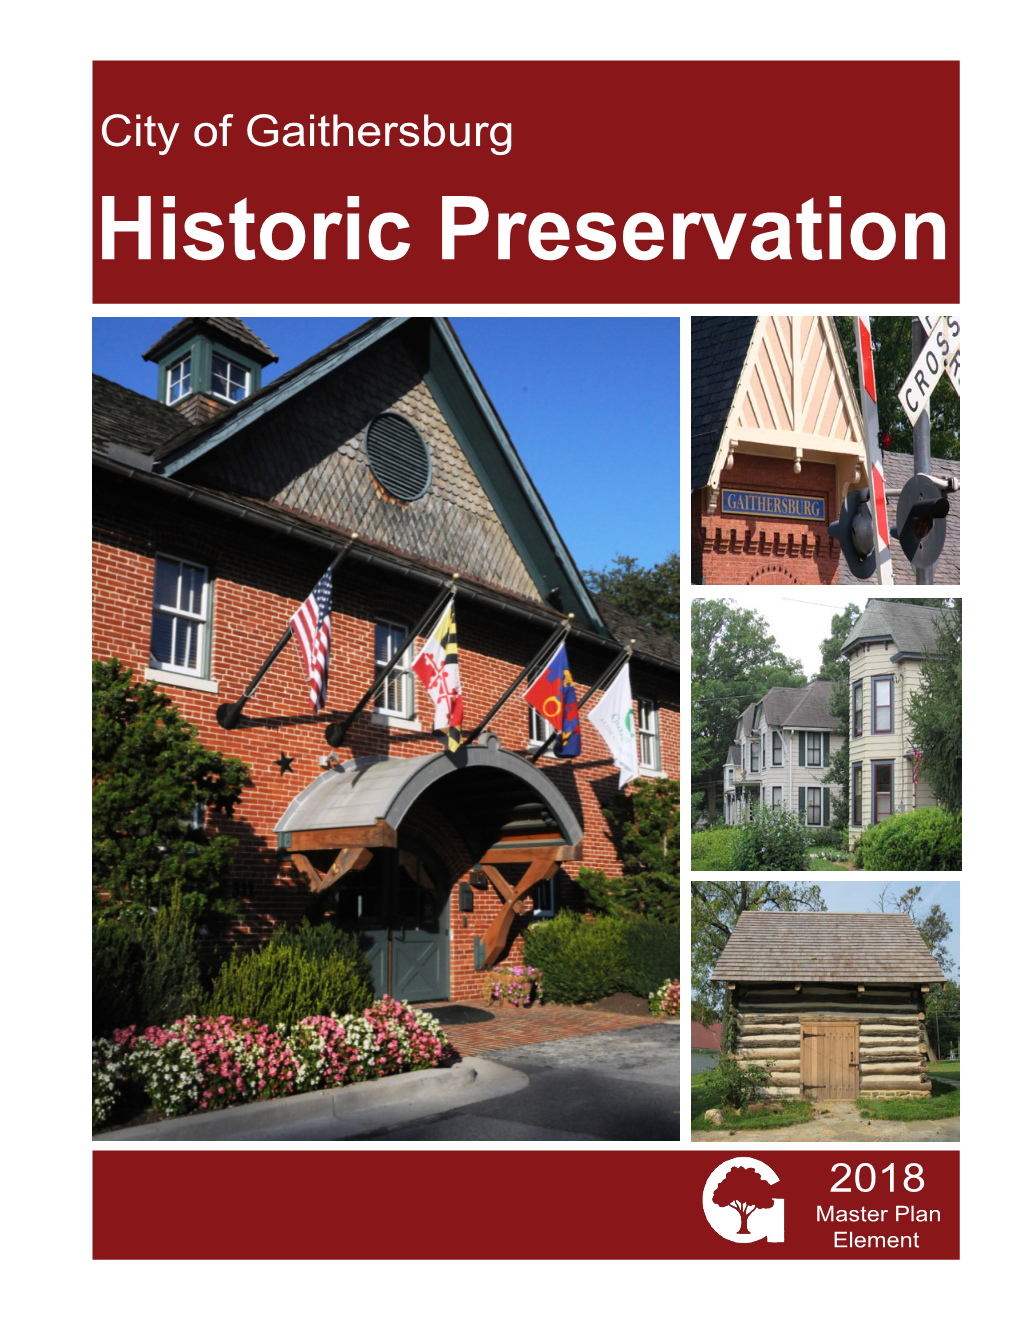 HISTORIC PRESERVATION ELEMENT Planning Commisson Approval: April 18,2018, Resolution PCR-1-18 Mayor and City Council Adoption: May 21, 2018, Resolution R-18-18